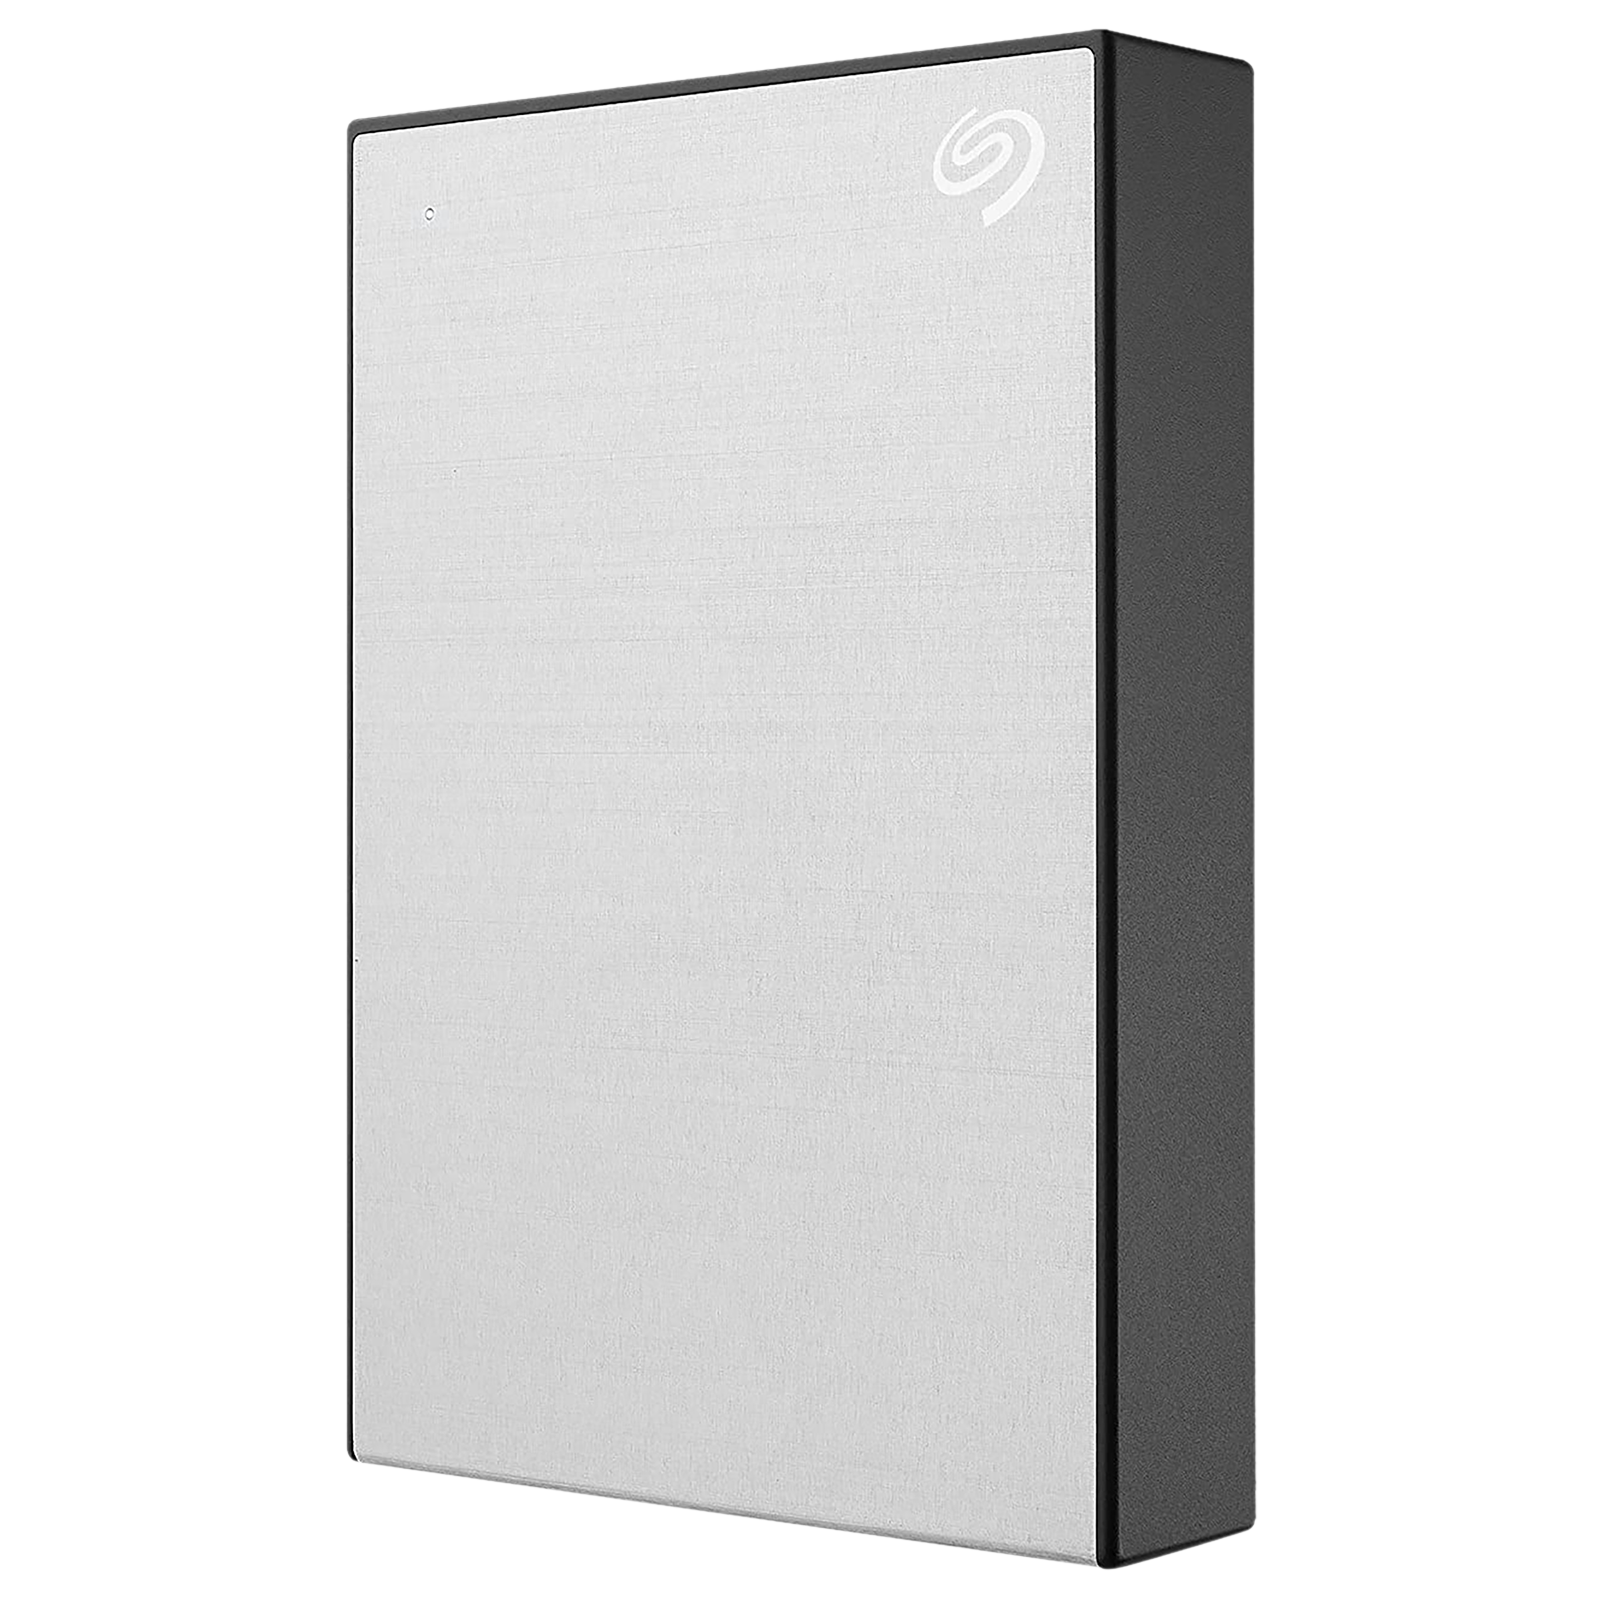 SEAGATE One Touch 4TB USB 3.0 Hard Disk Drive (Mac And Windows Compatible, STKZ4000401, Silver)